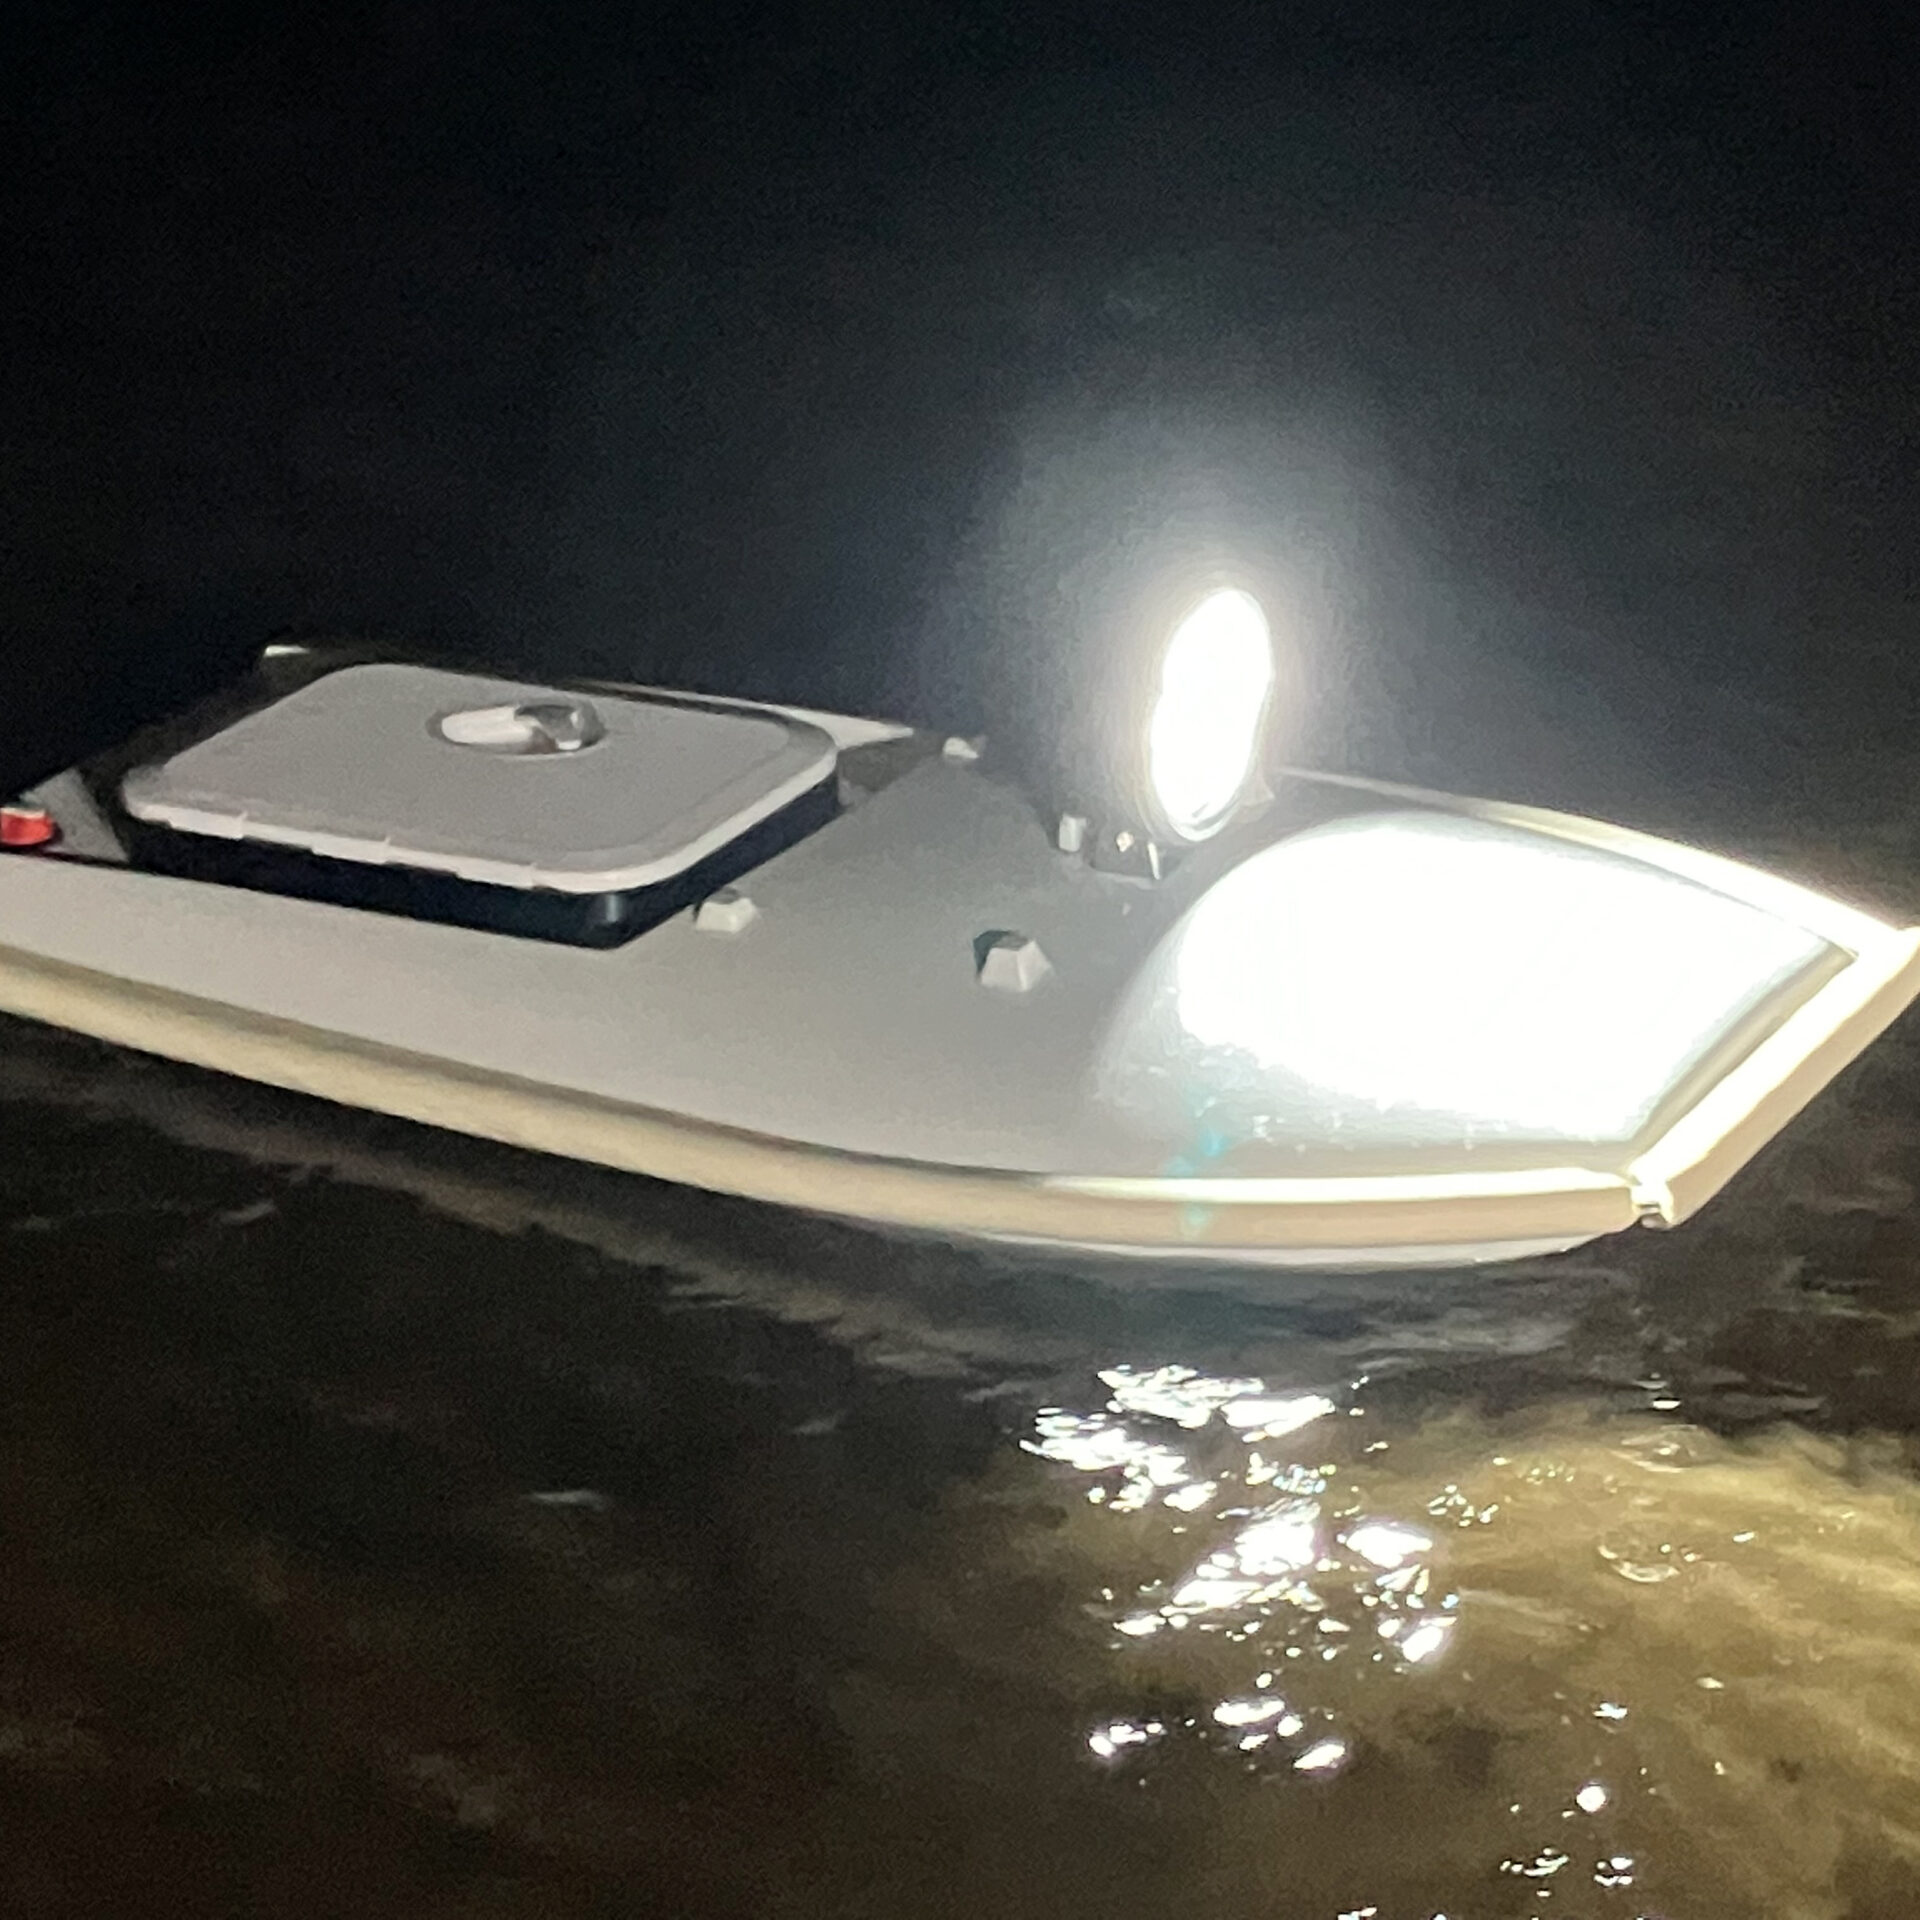 The Lighting on the boat beams a bright light above the water surface.